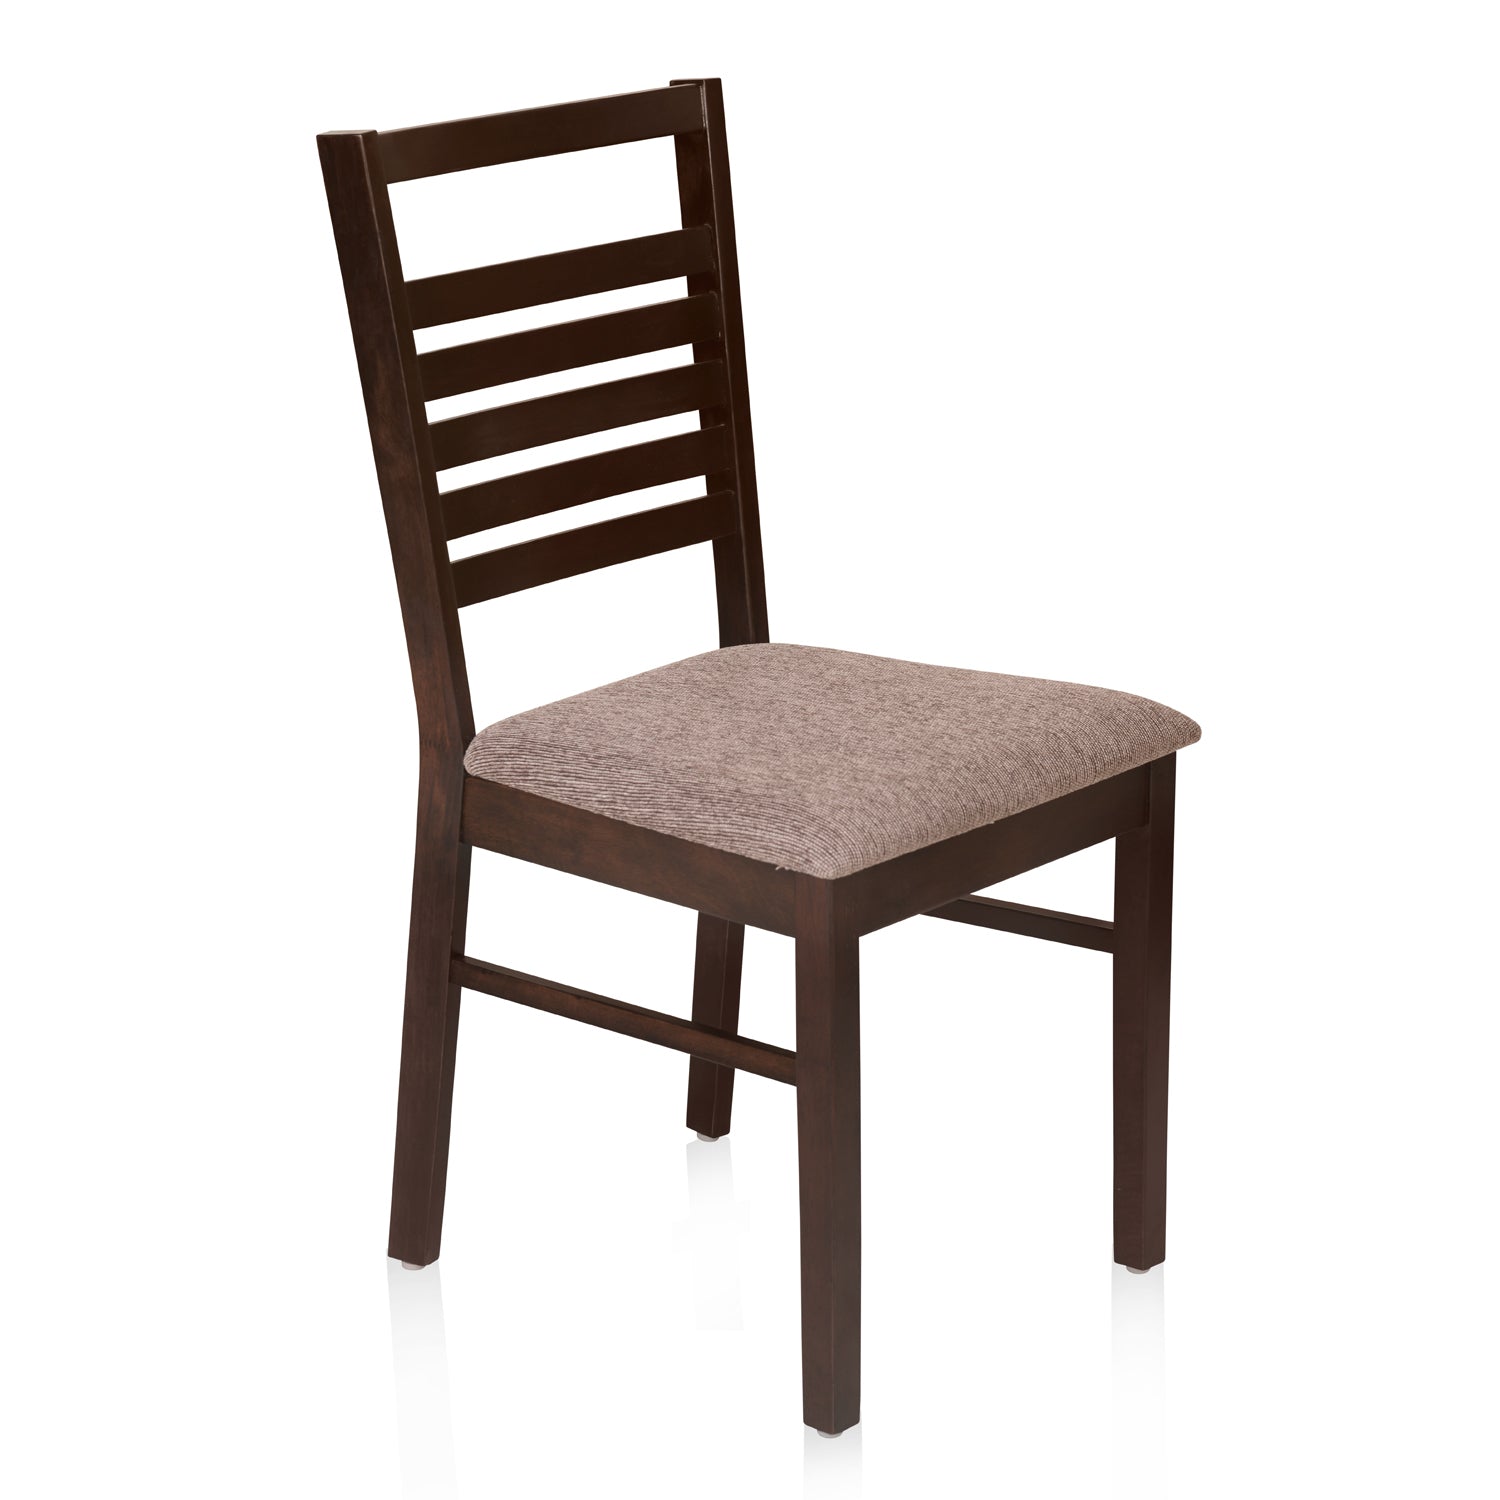 Gem Dining Chair Set of 2 (Cappuccino)